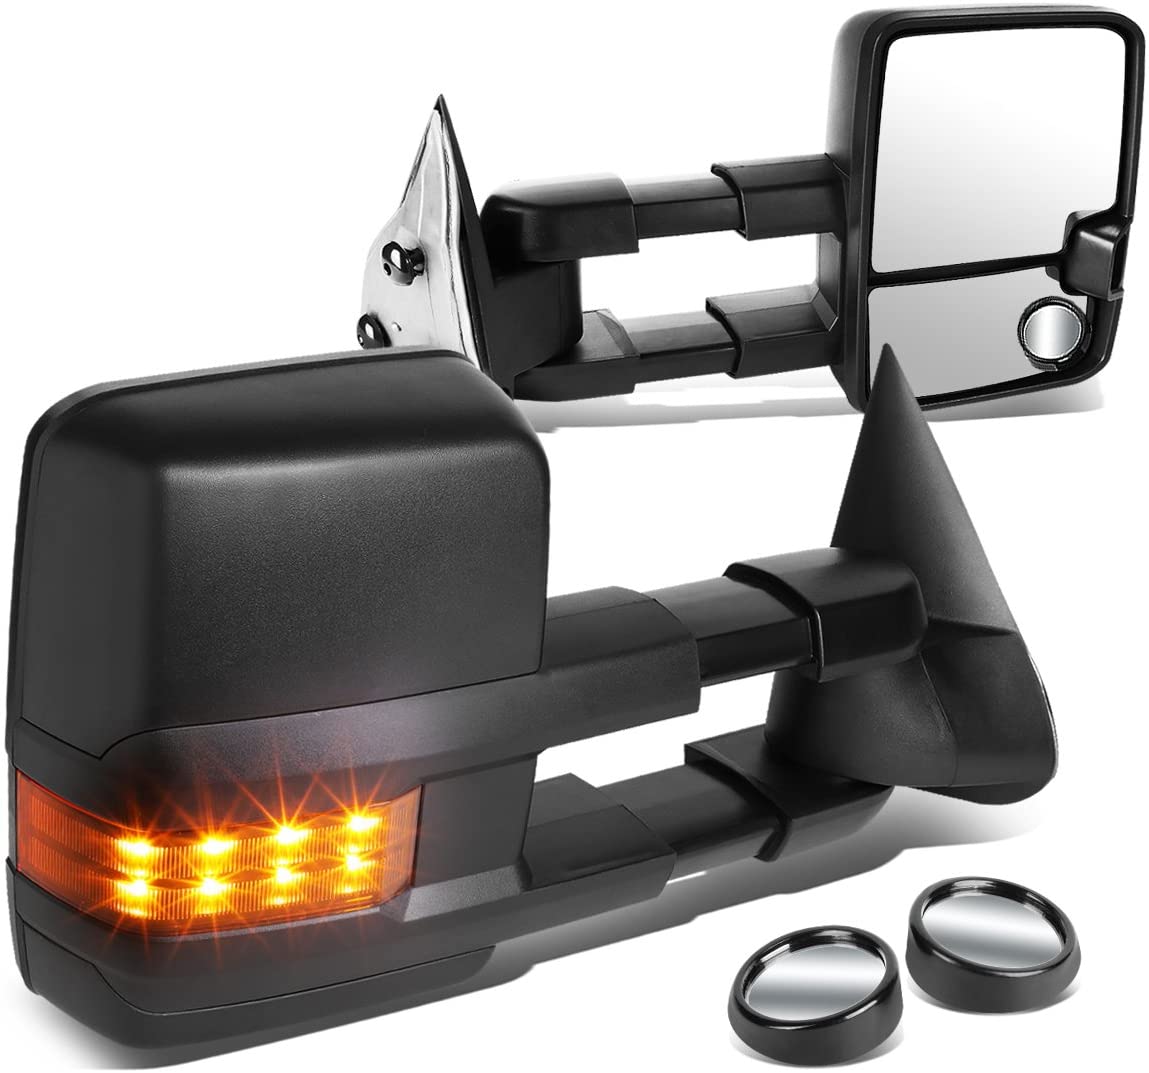 DNA Motoring TWM-015-T666-BK-AM+DM-SY-022 Pair of Towing Side Mirrors + Blind Spot Mirrors